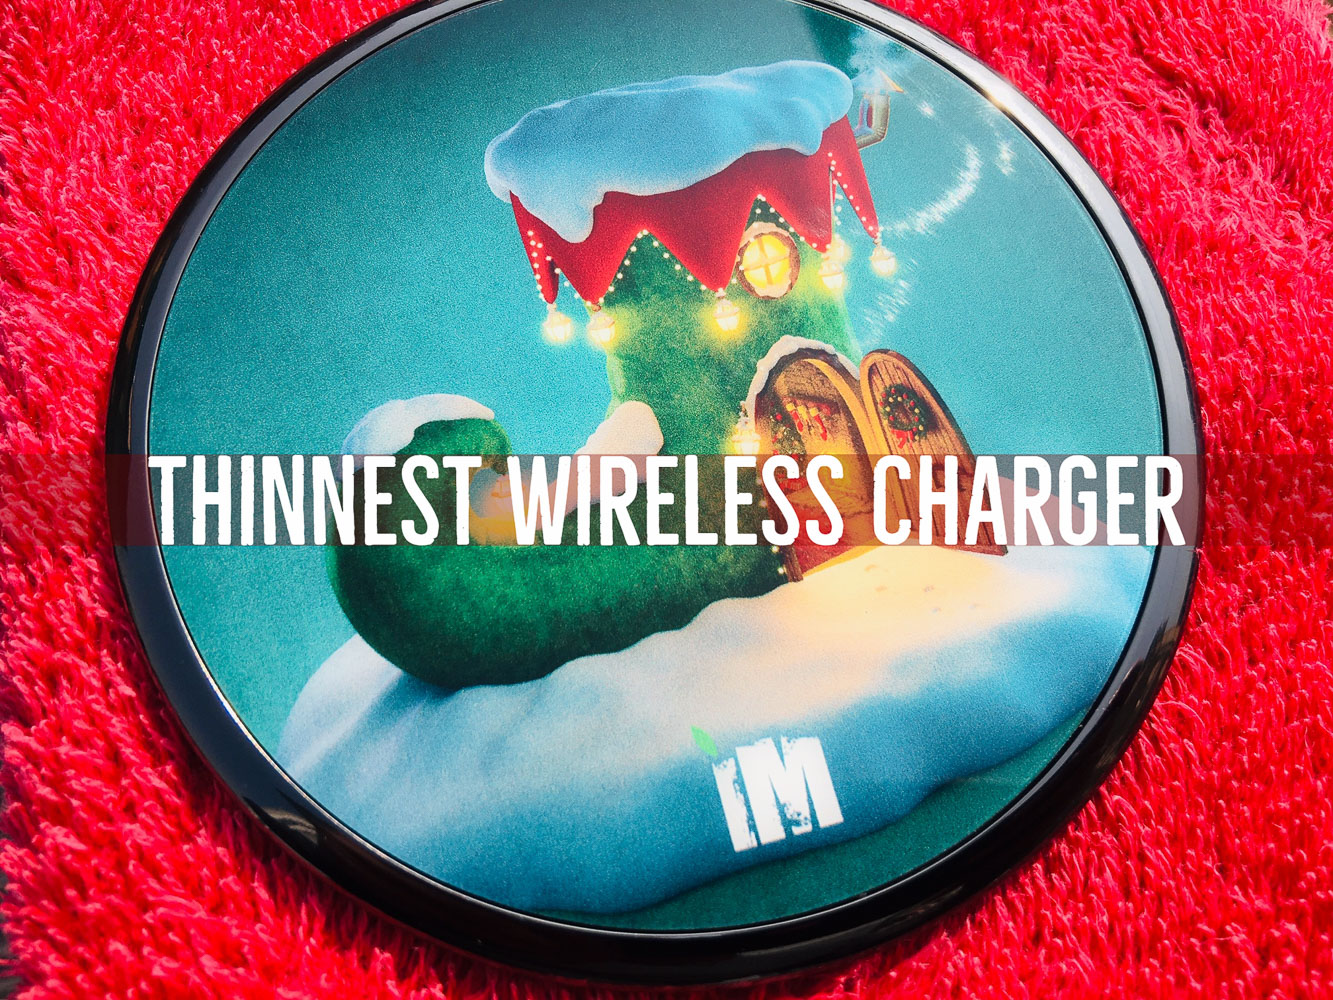 Choetech T556-S Ultra-Slim wireless charger